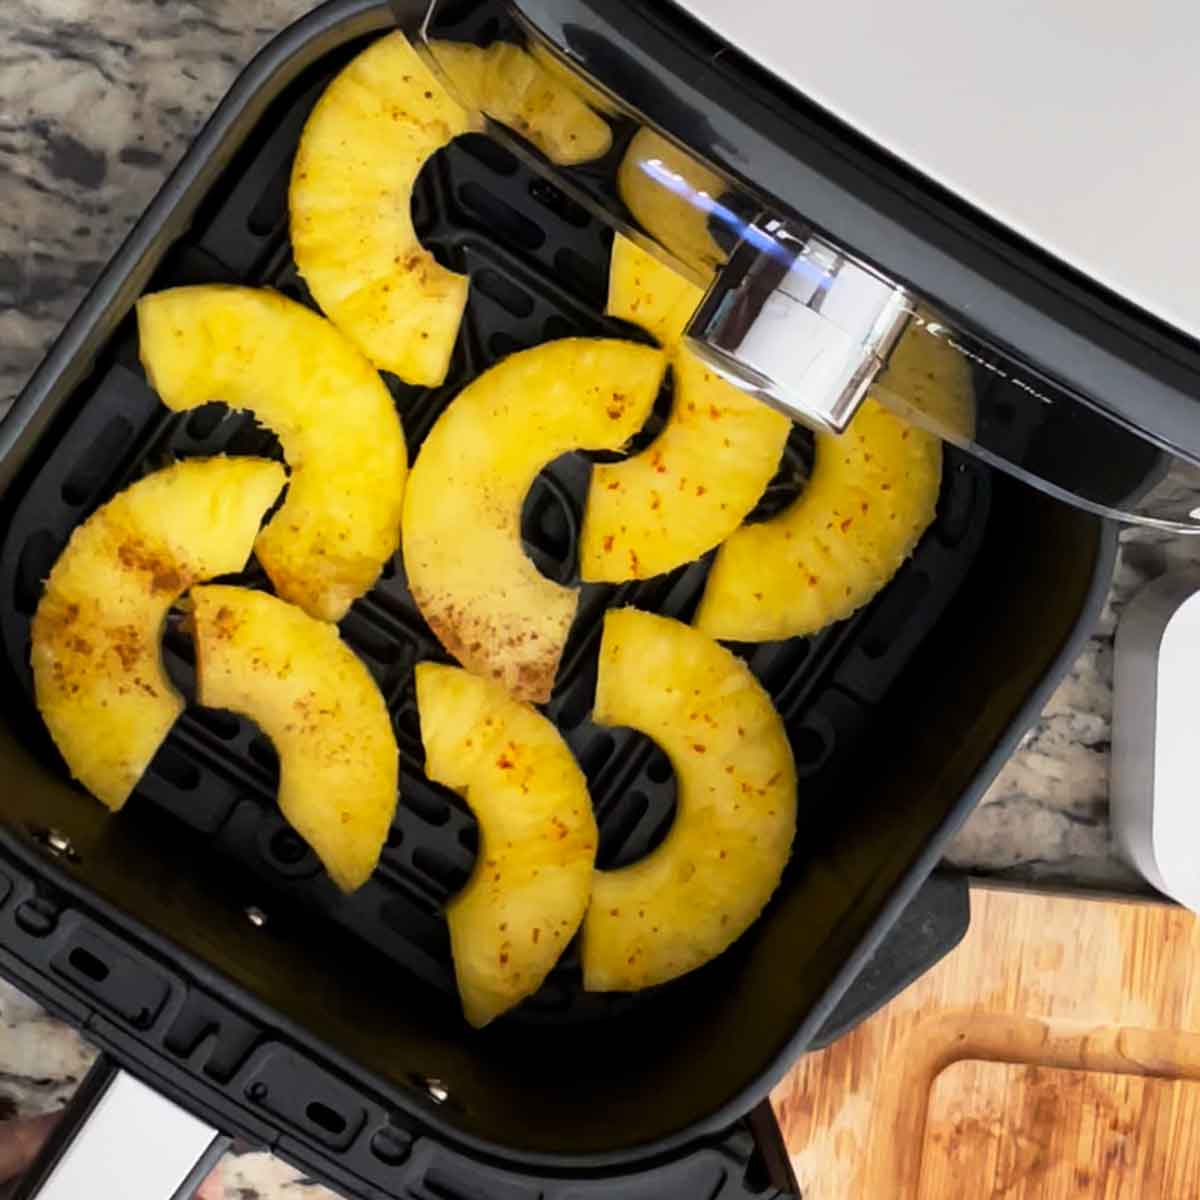 Sliced pineapple chunks placed in air fryer.